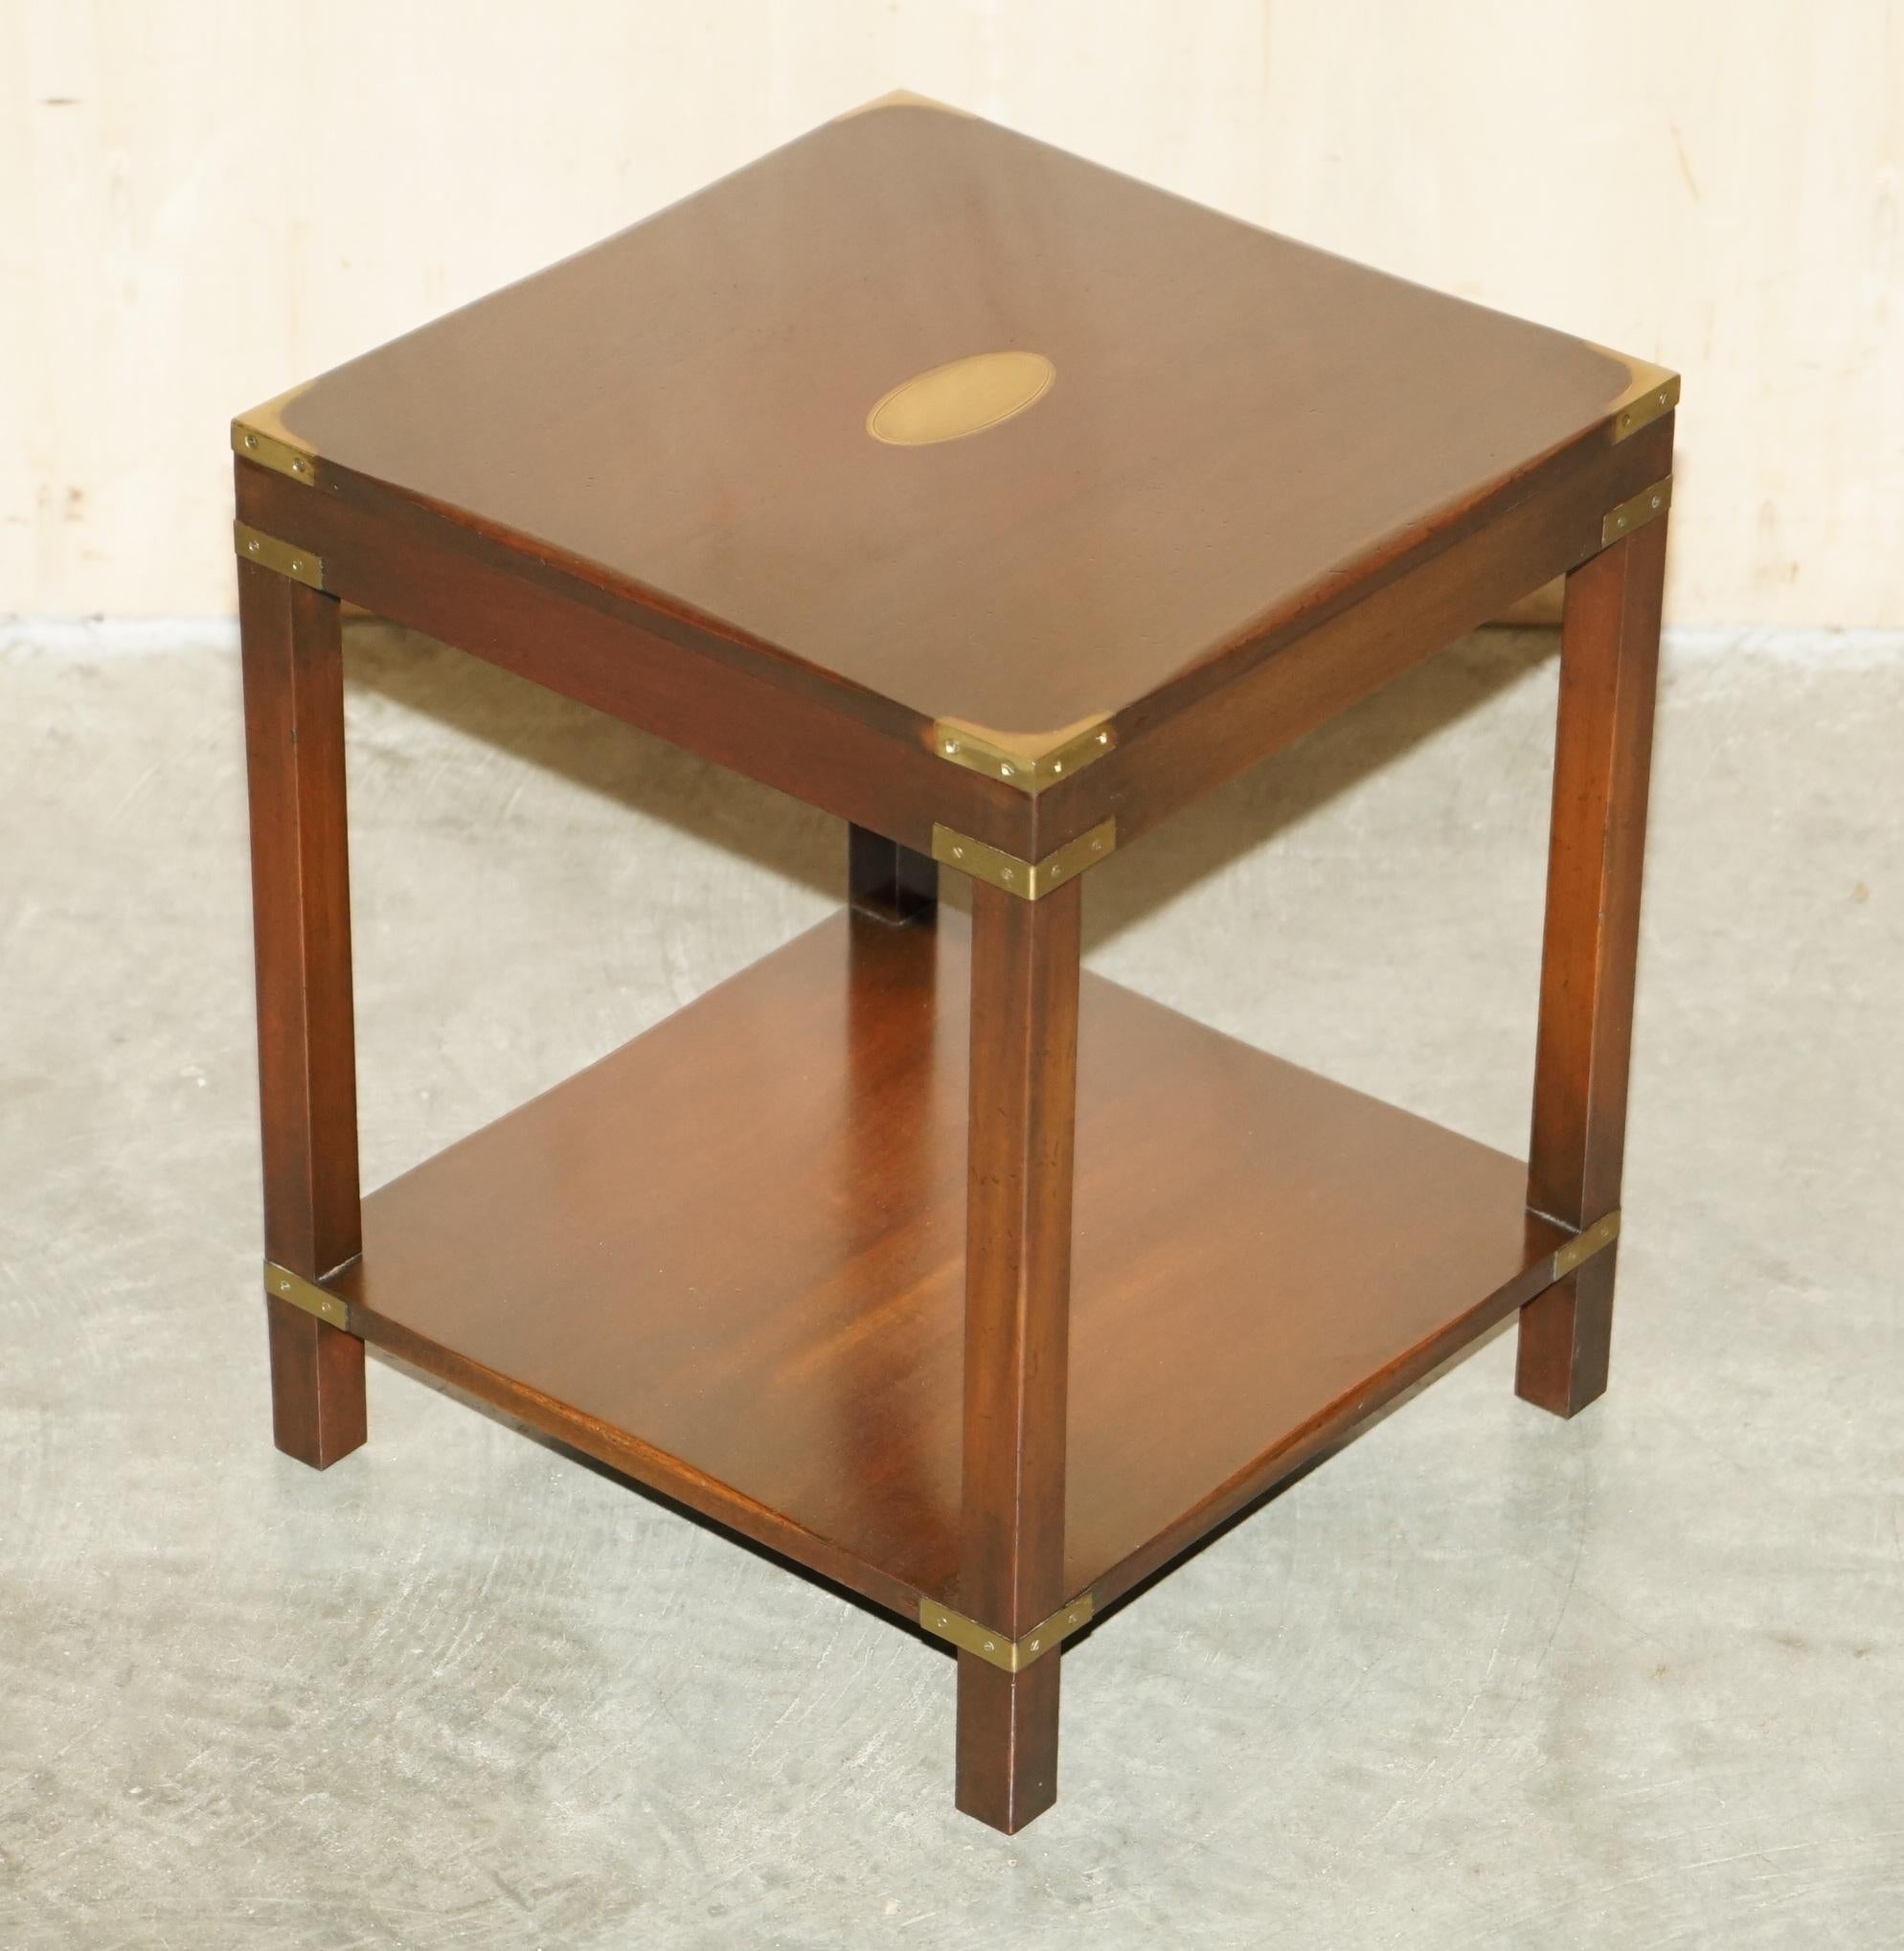 Royal House Antiques

Royal House Antiques is delighted to offer for sale this very nicely made Military campaign side table made by Kennedy and retailed through Harrods London.

Please note the delivery fee listed is just a guide, it covers within